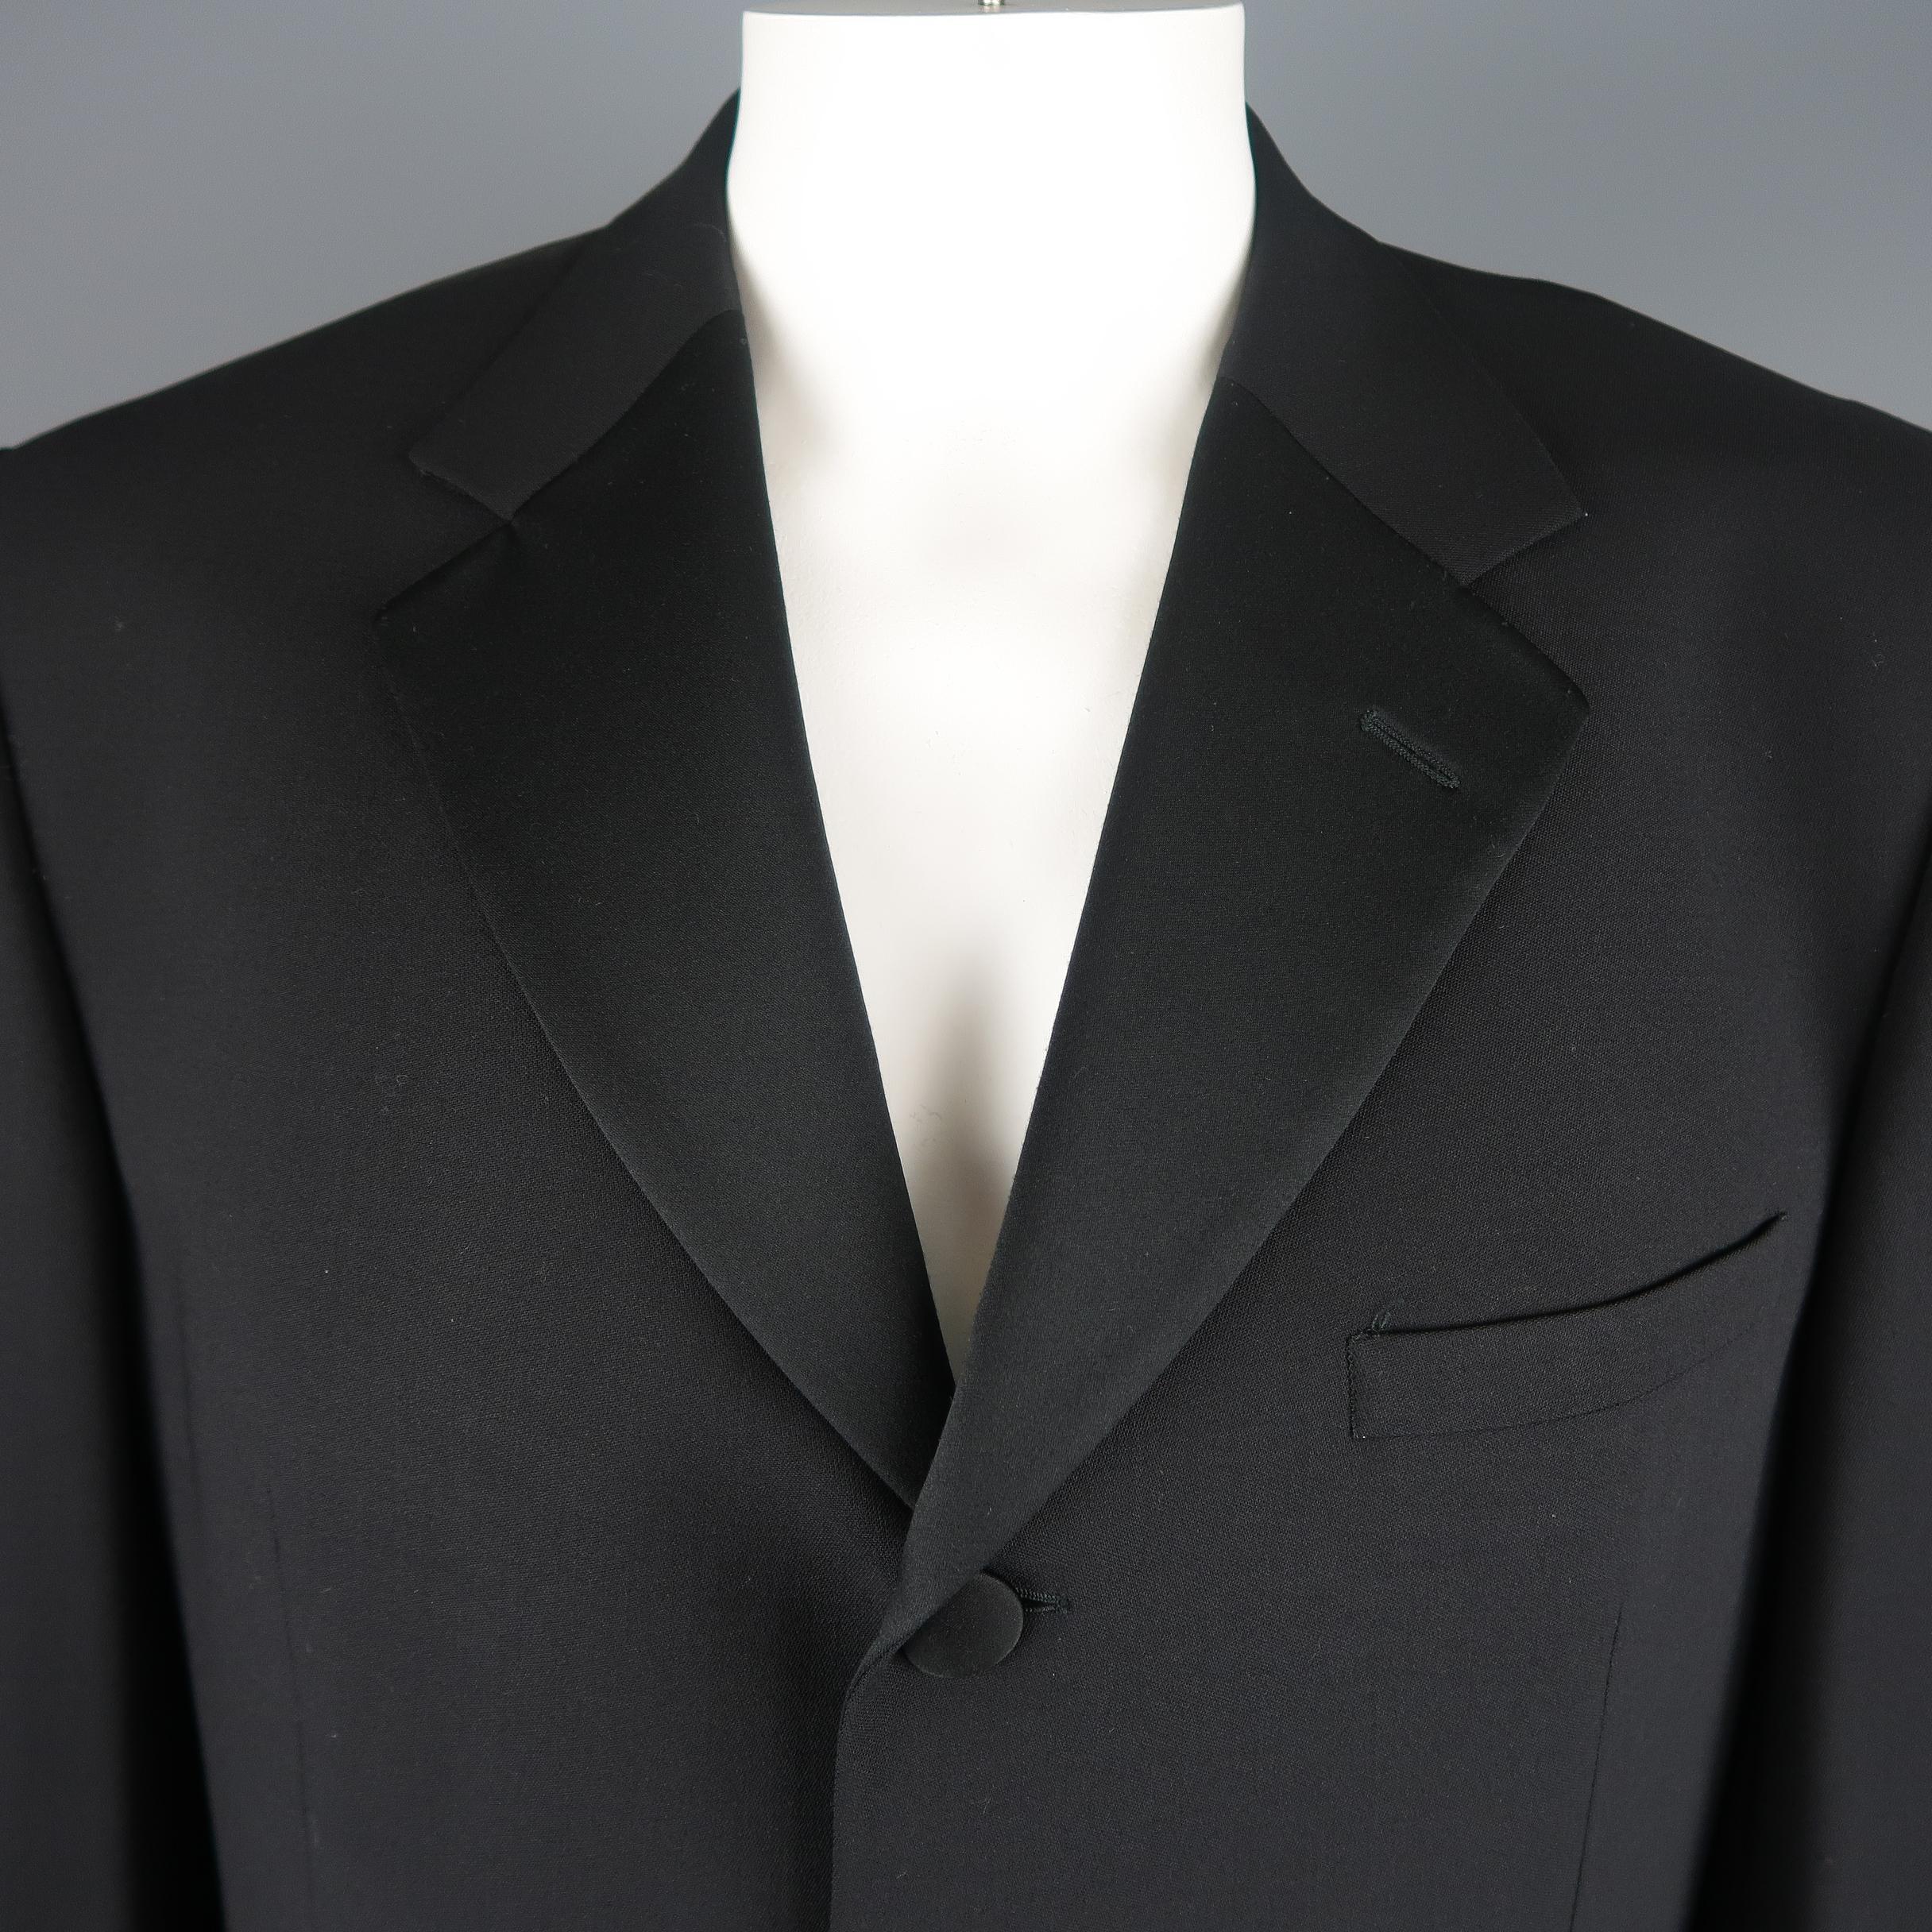 Single breasted V2 CLASSIC by VERSACE sport coat tuxedo jacket comes in black wool blend fabric with a half satin notch lapel, four button front with satin buttons, and short vented back. Made in Italy.
 
Excellent Pre-Owned Condition.
Marked: IT